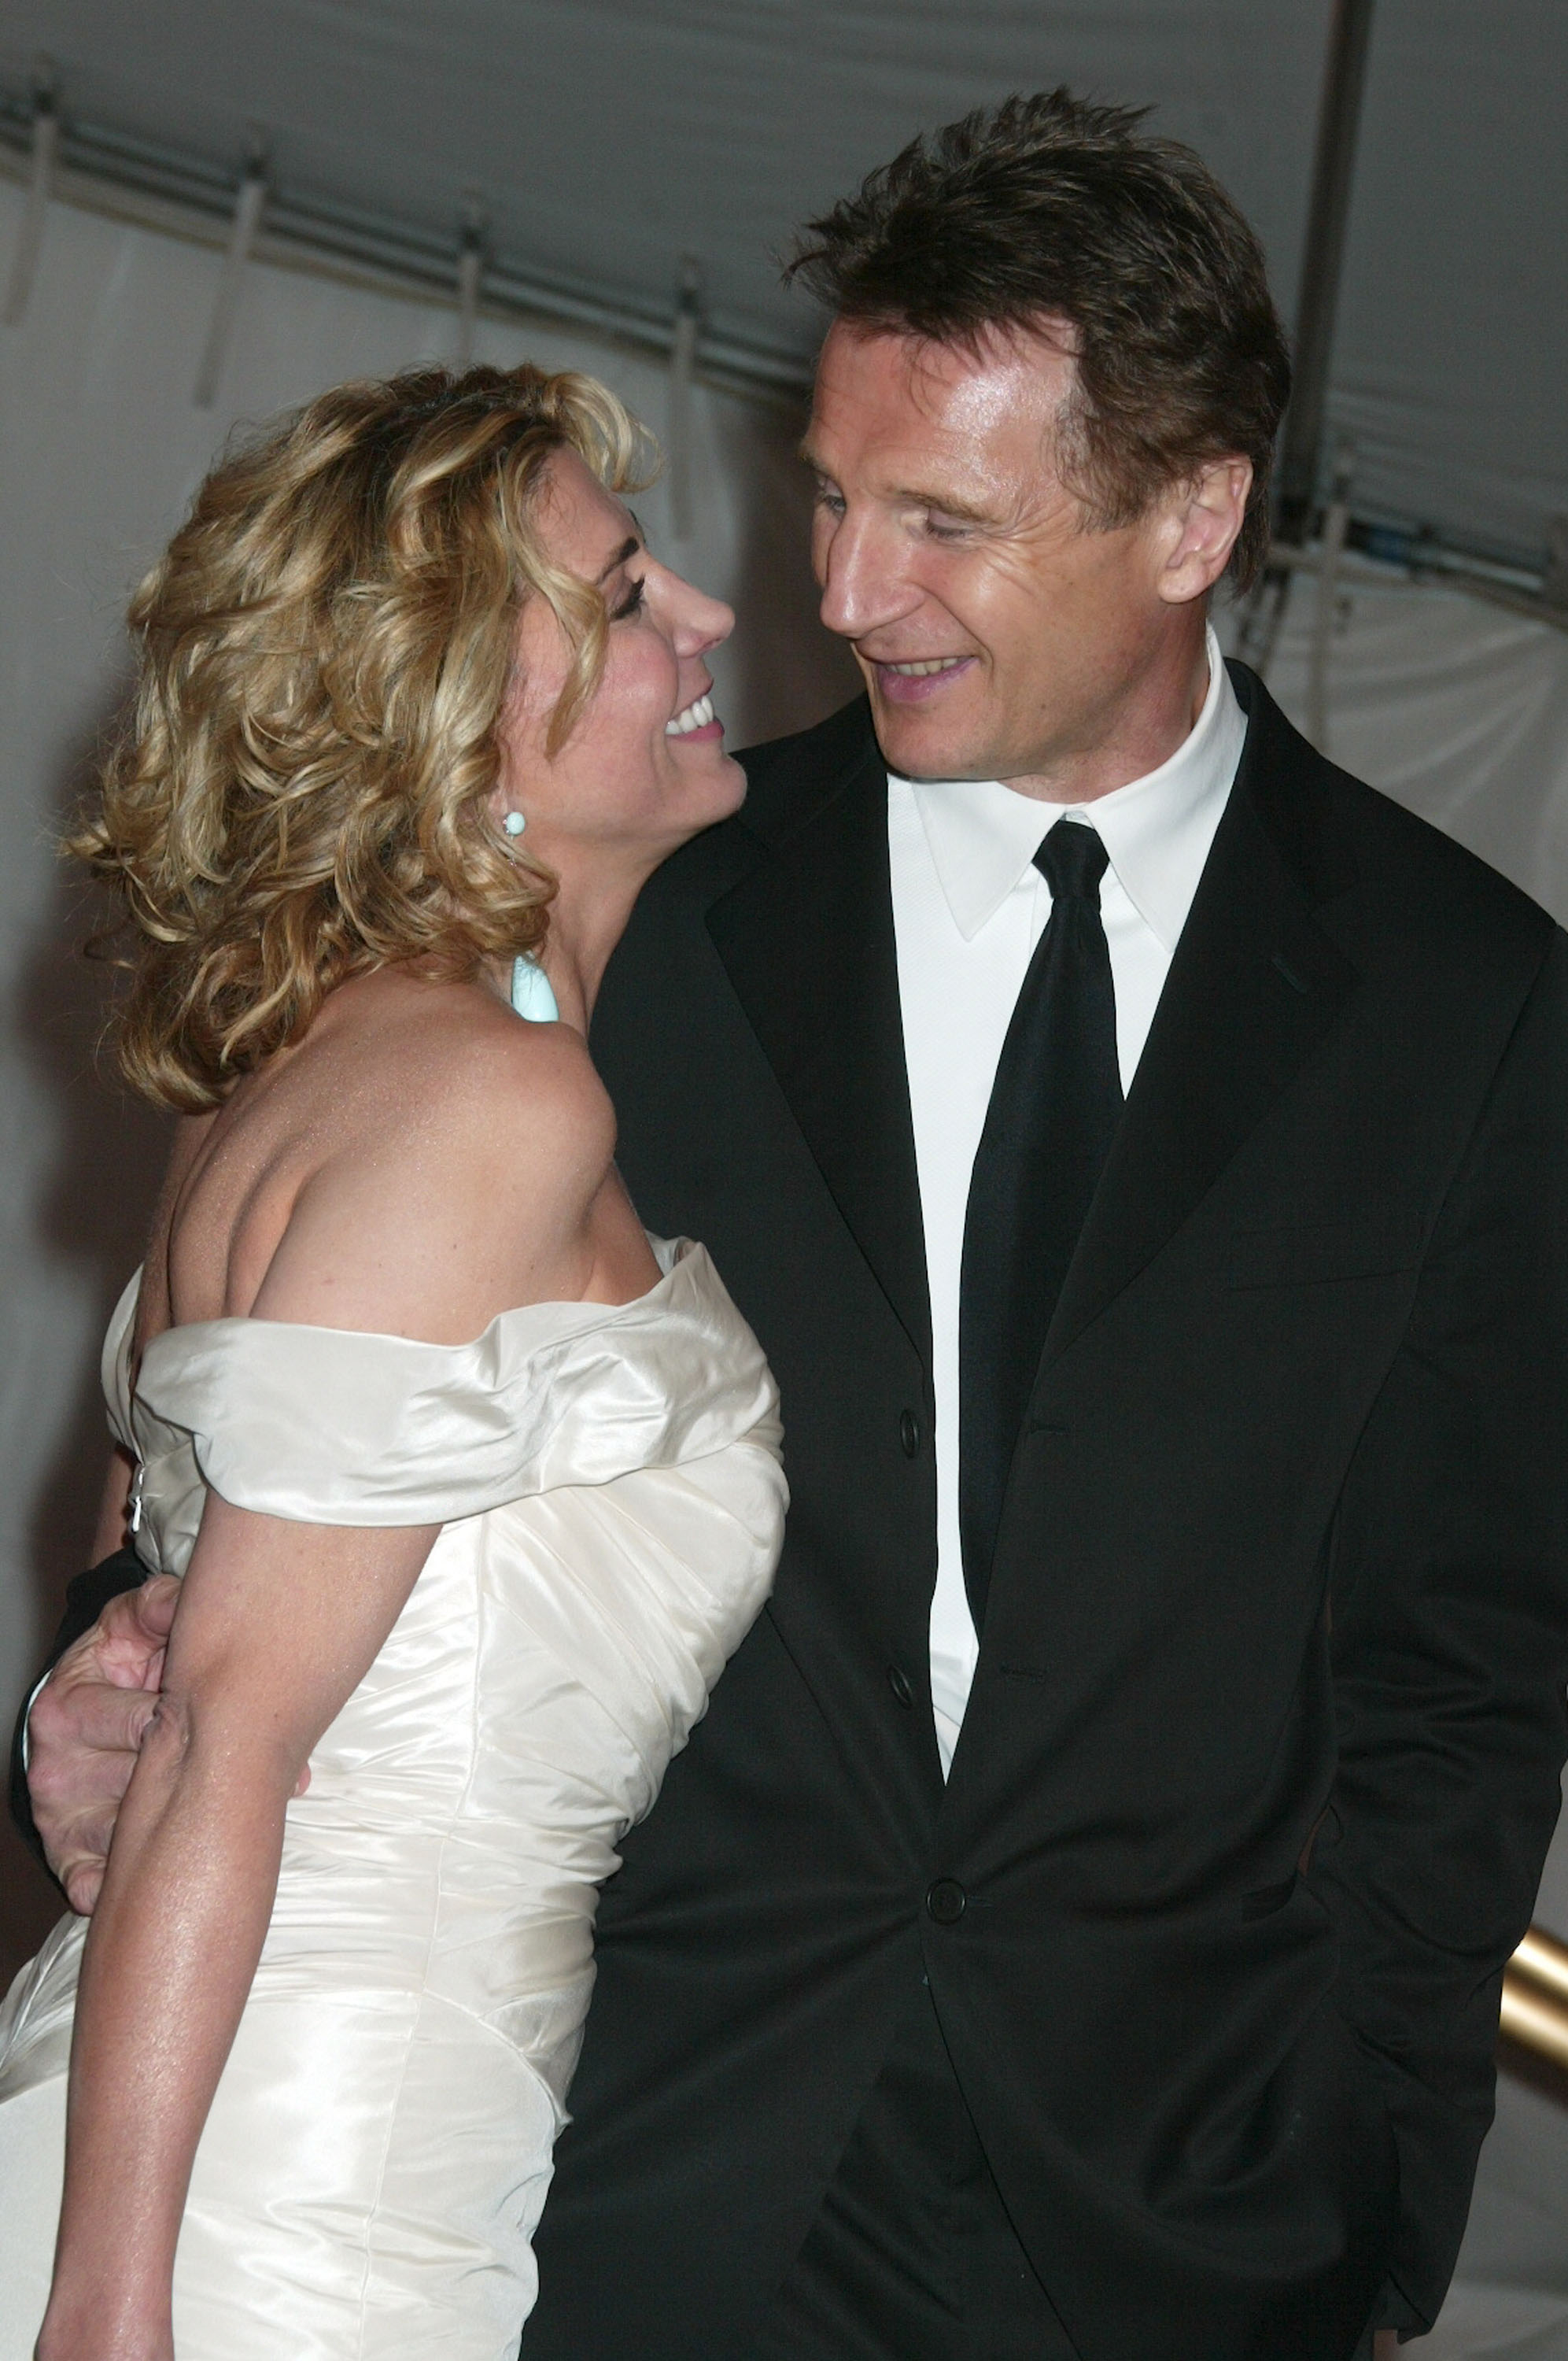 Natasha Richardson and Liam Neeson during The Costume Institute's Gala Celebrating "Chanel" - Departures in New York City on May 2, 2005 | Source: Getty Images